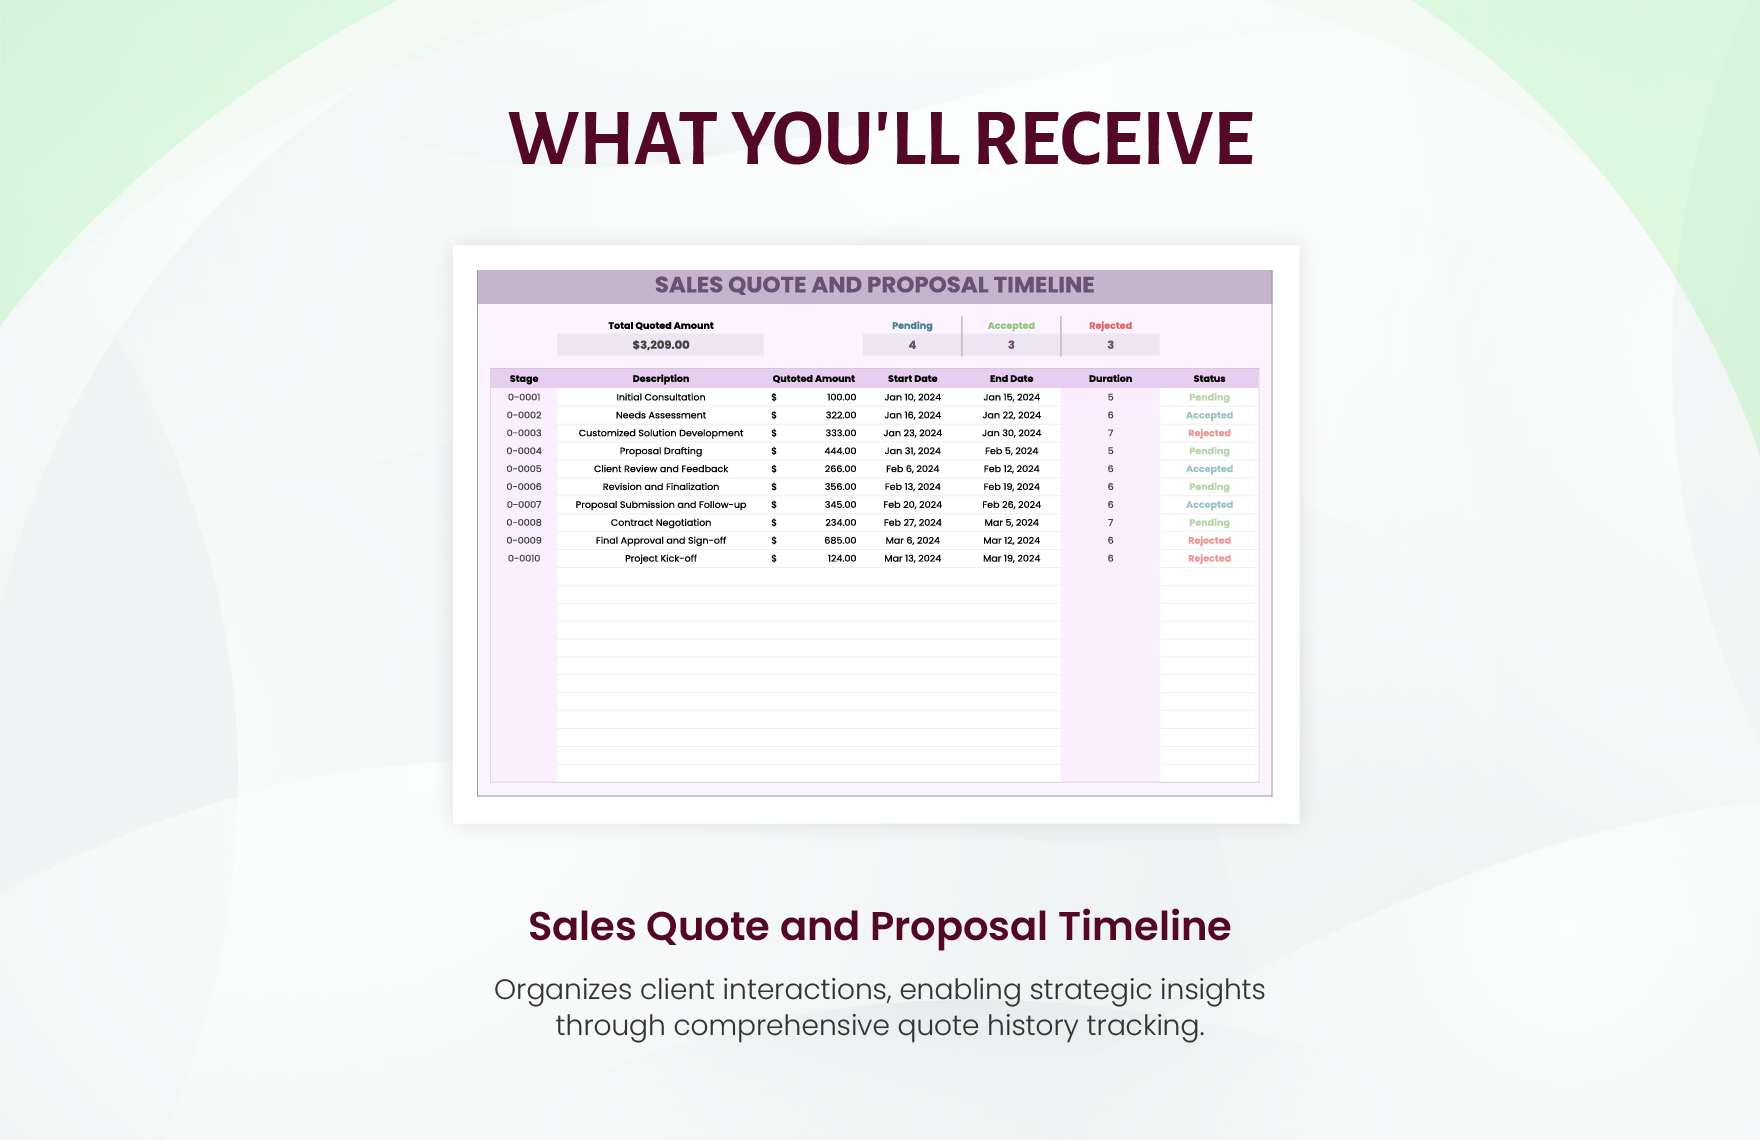 Sales Quote and Proposal Timeline Template